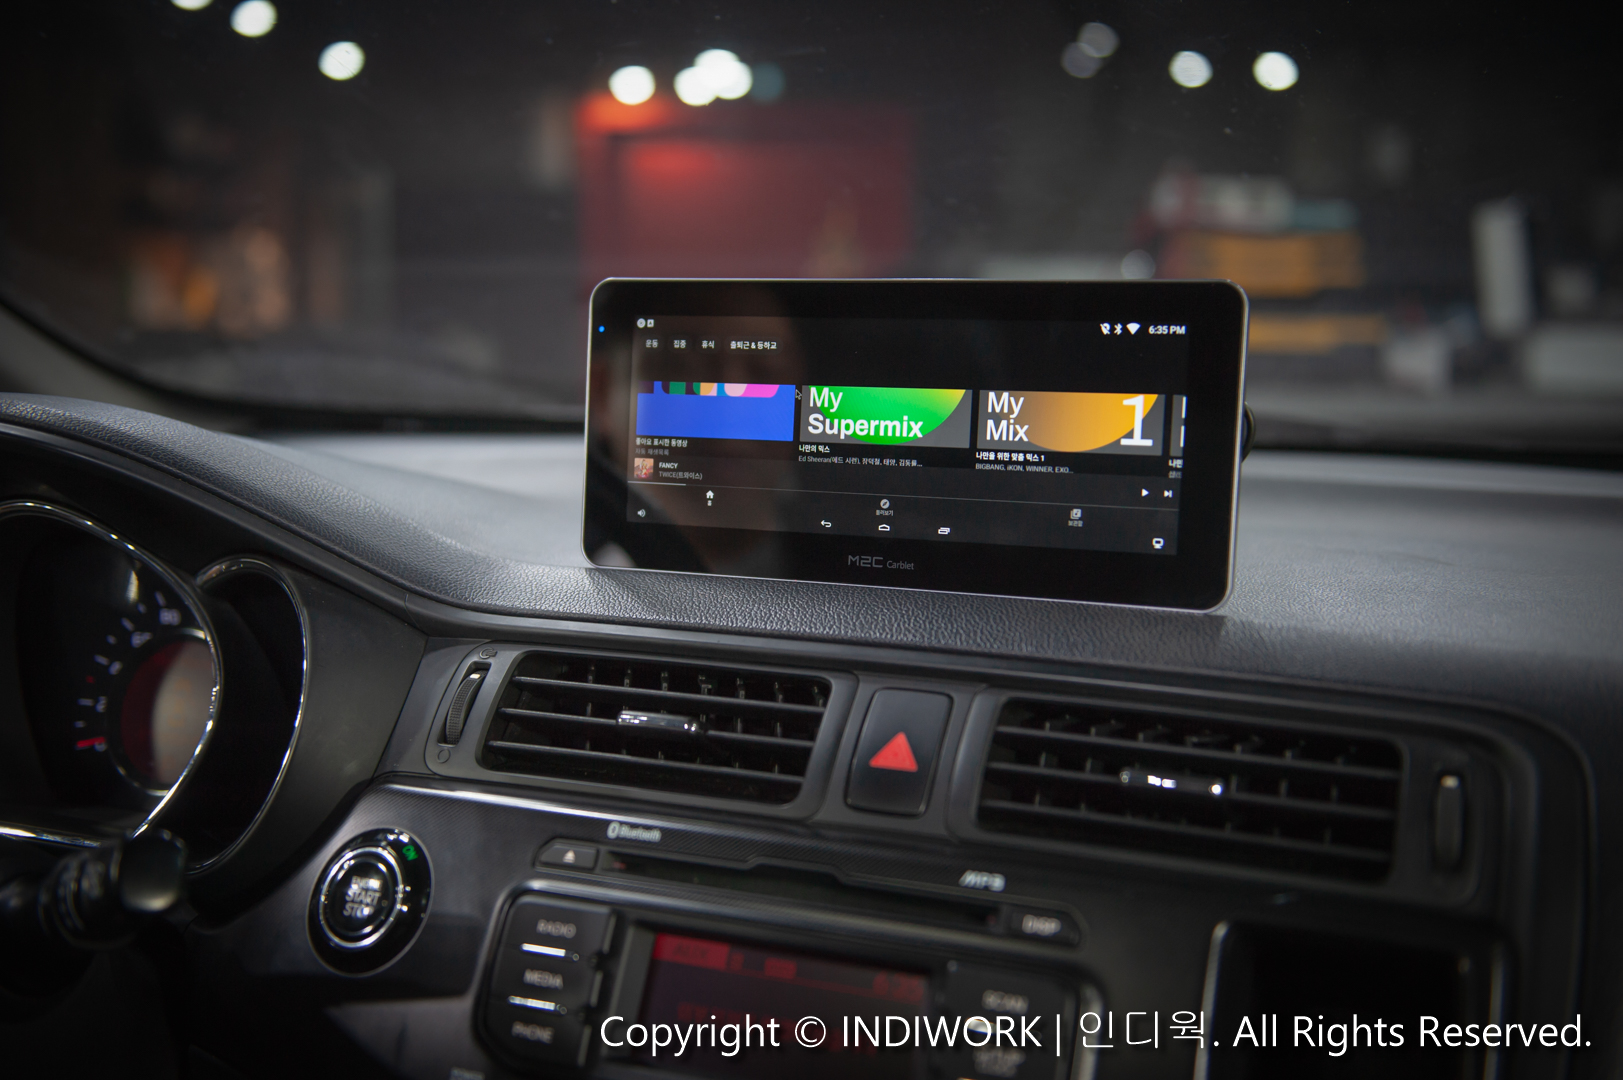 Android "CarPC" on the dashboard "M2C-8800" Wide 8.8inch